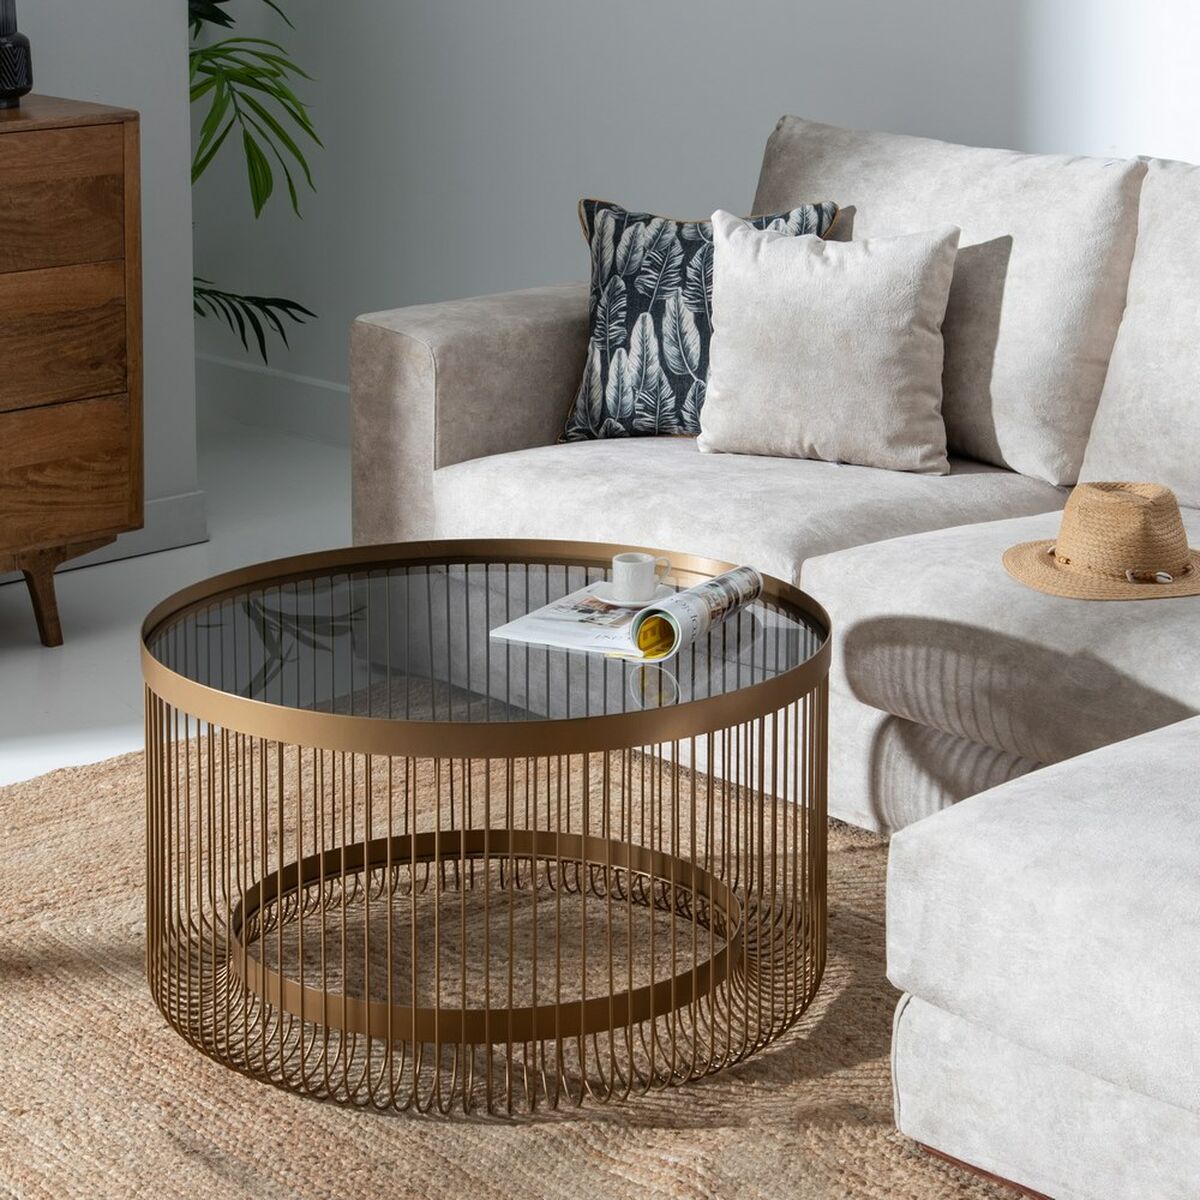 Centre Table in Golden Metal and Glass (81 x 81 x 45,5 cm)